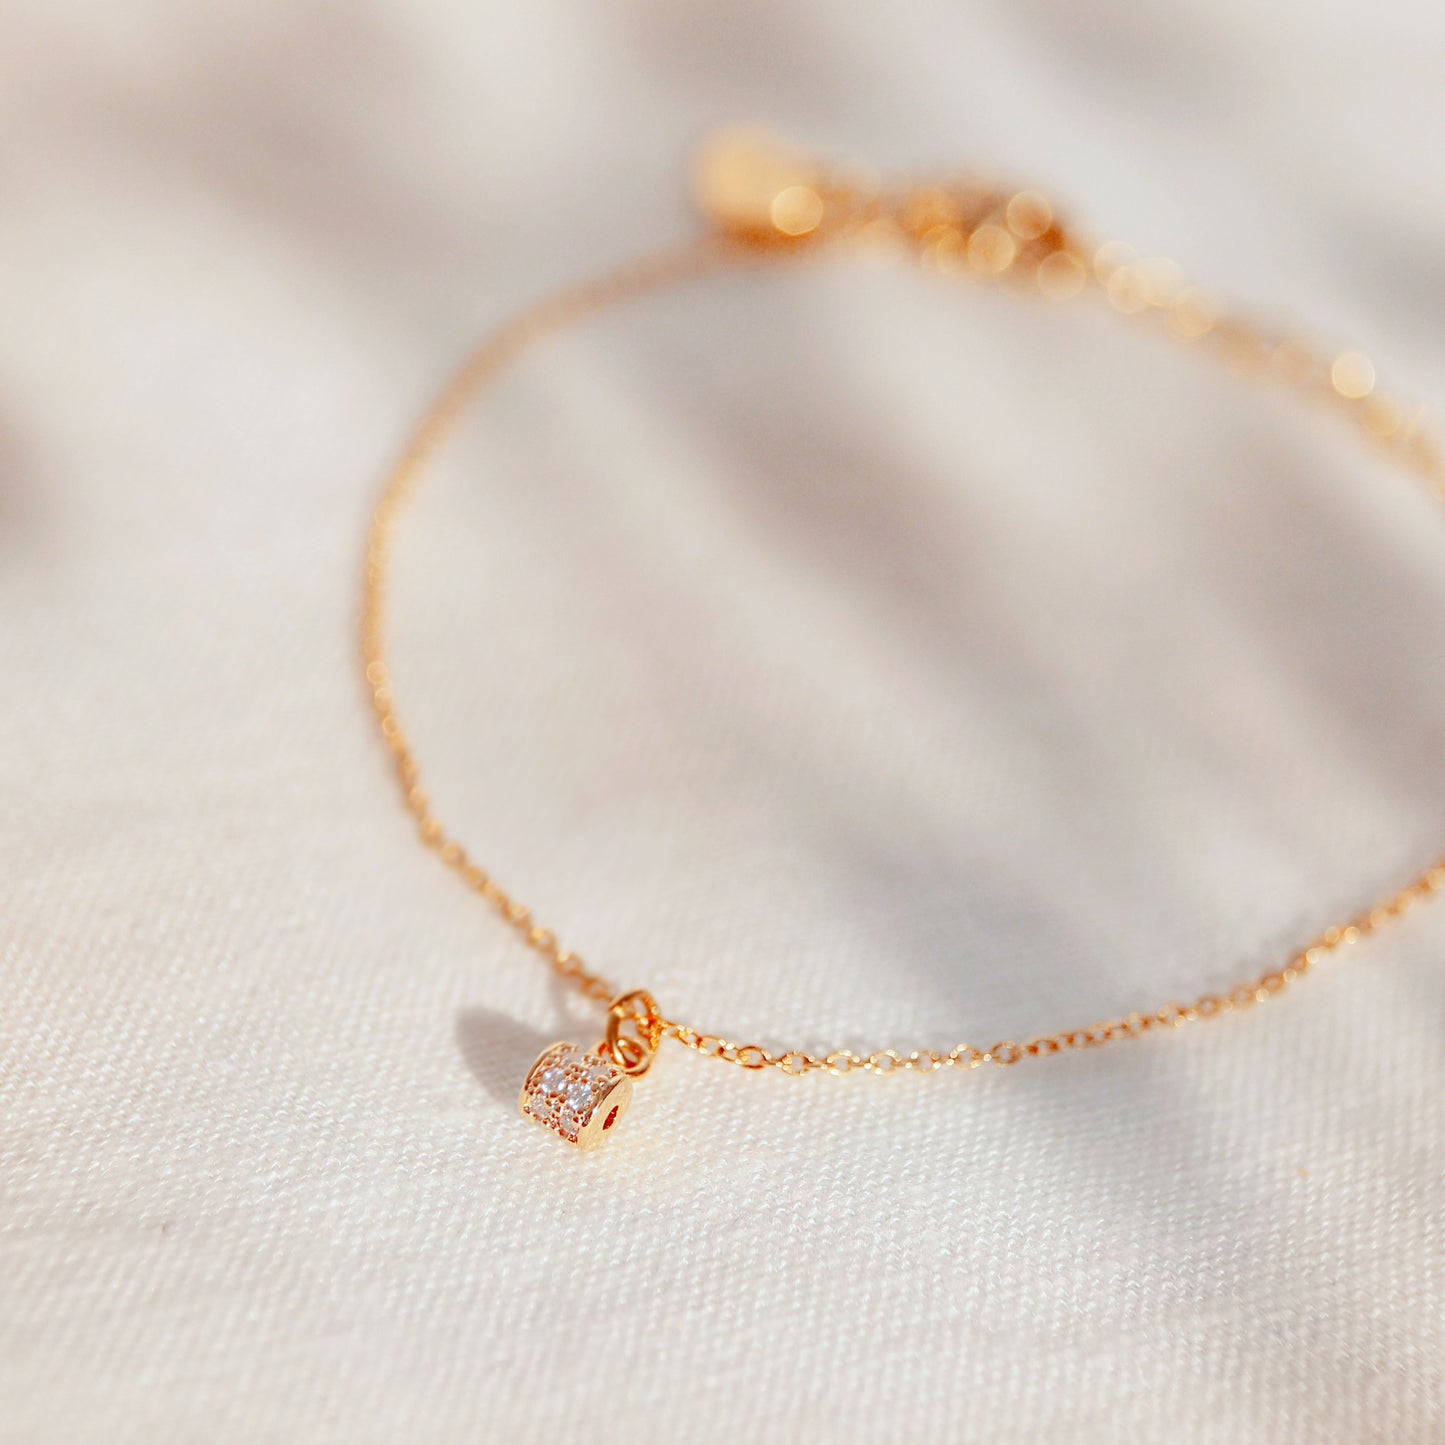 Tiny gold cubic anklet dainty cute anklets best gift for her gold summer anklets